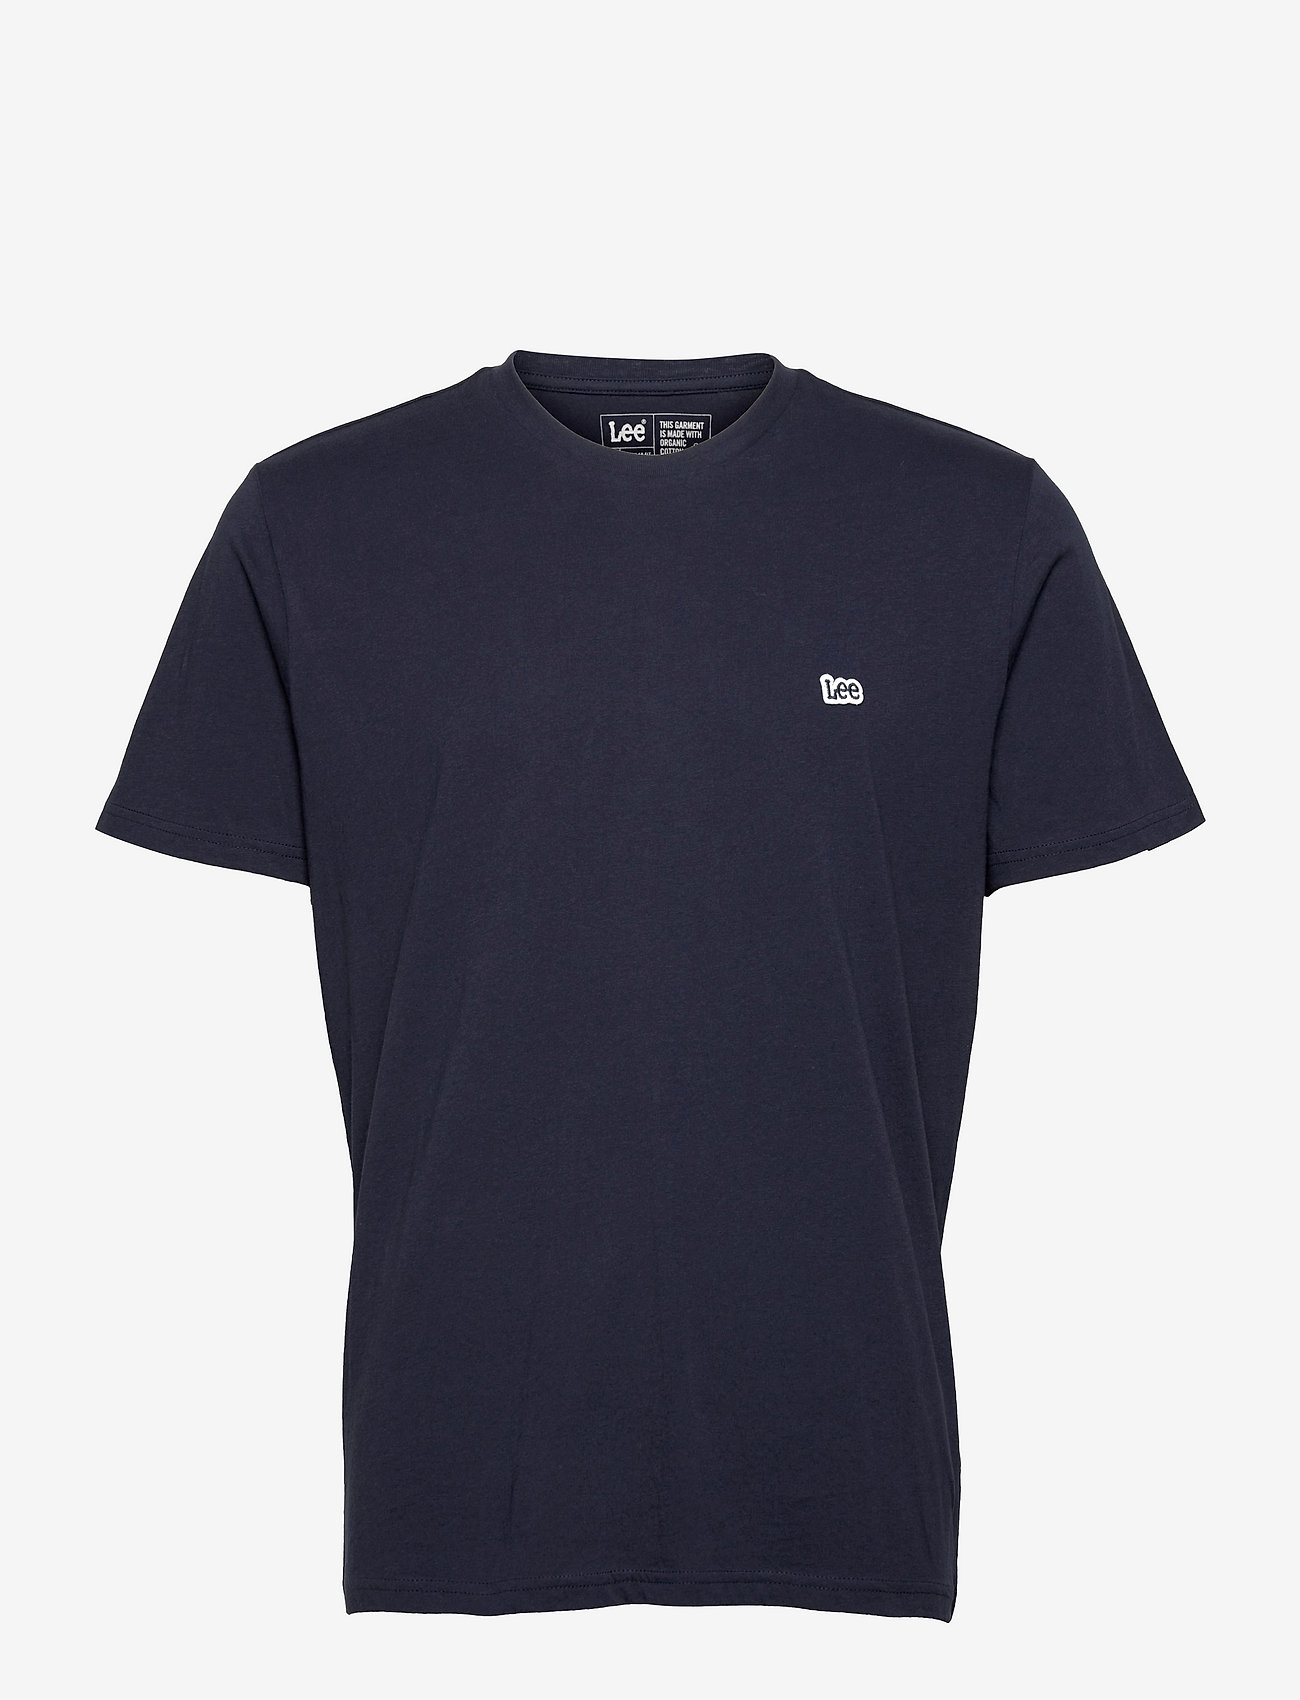 Lee Jeans - SS PATCH LOGO TEE - lowest prices - navy - 0